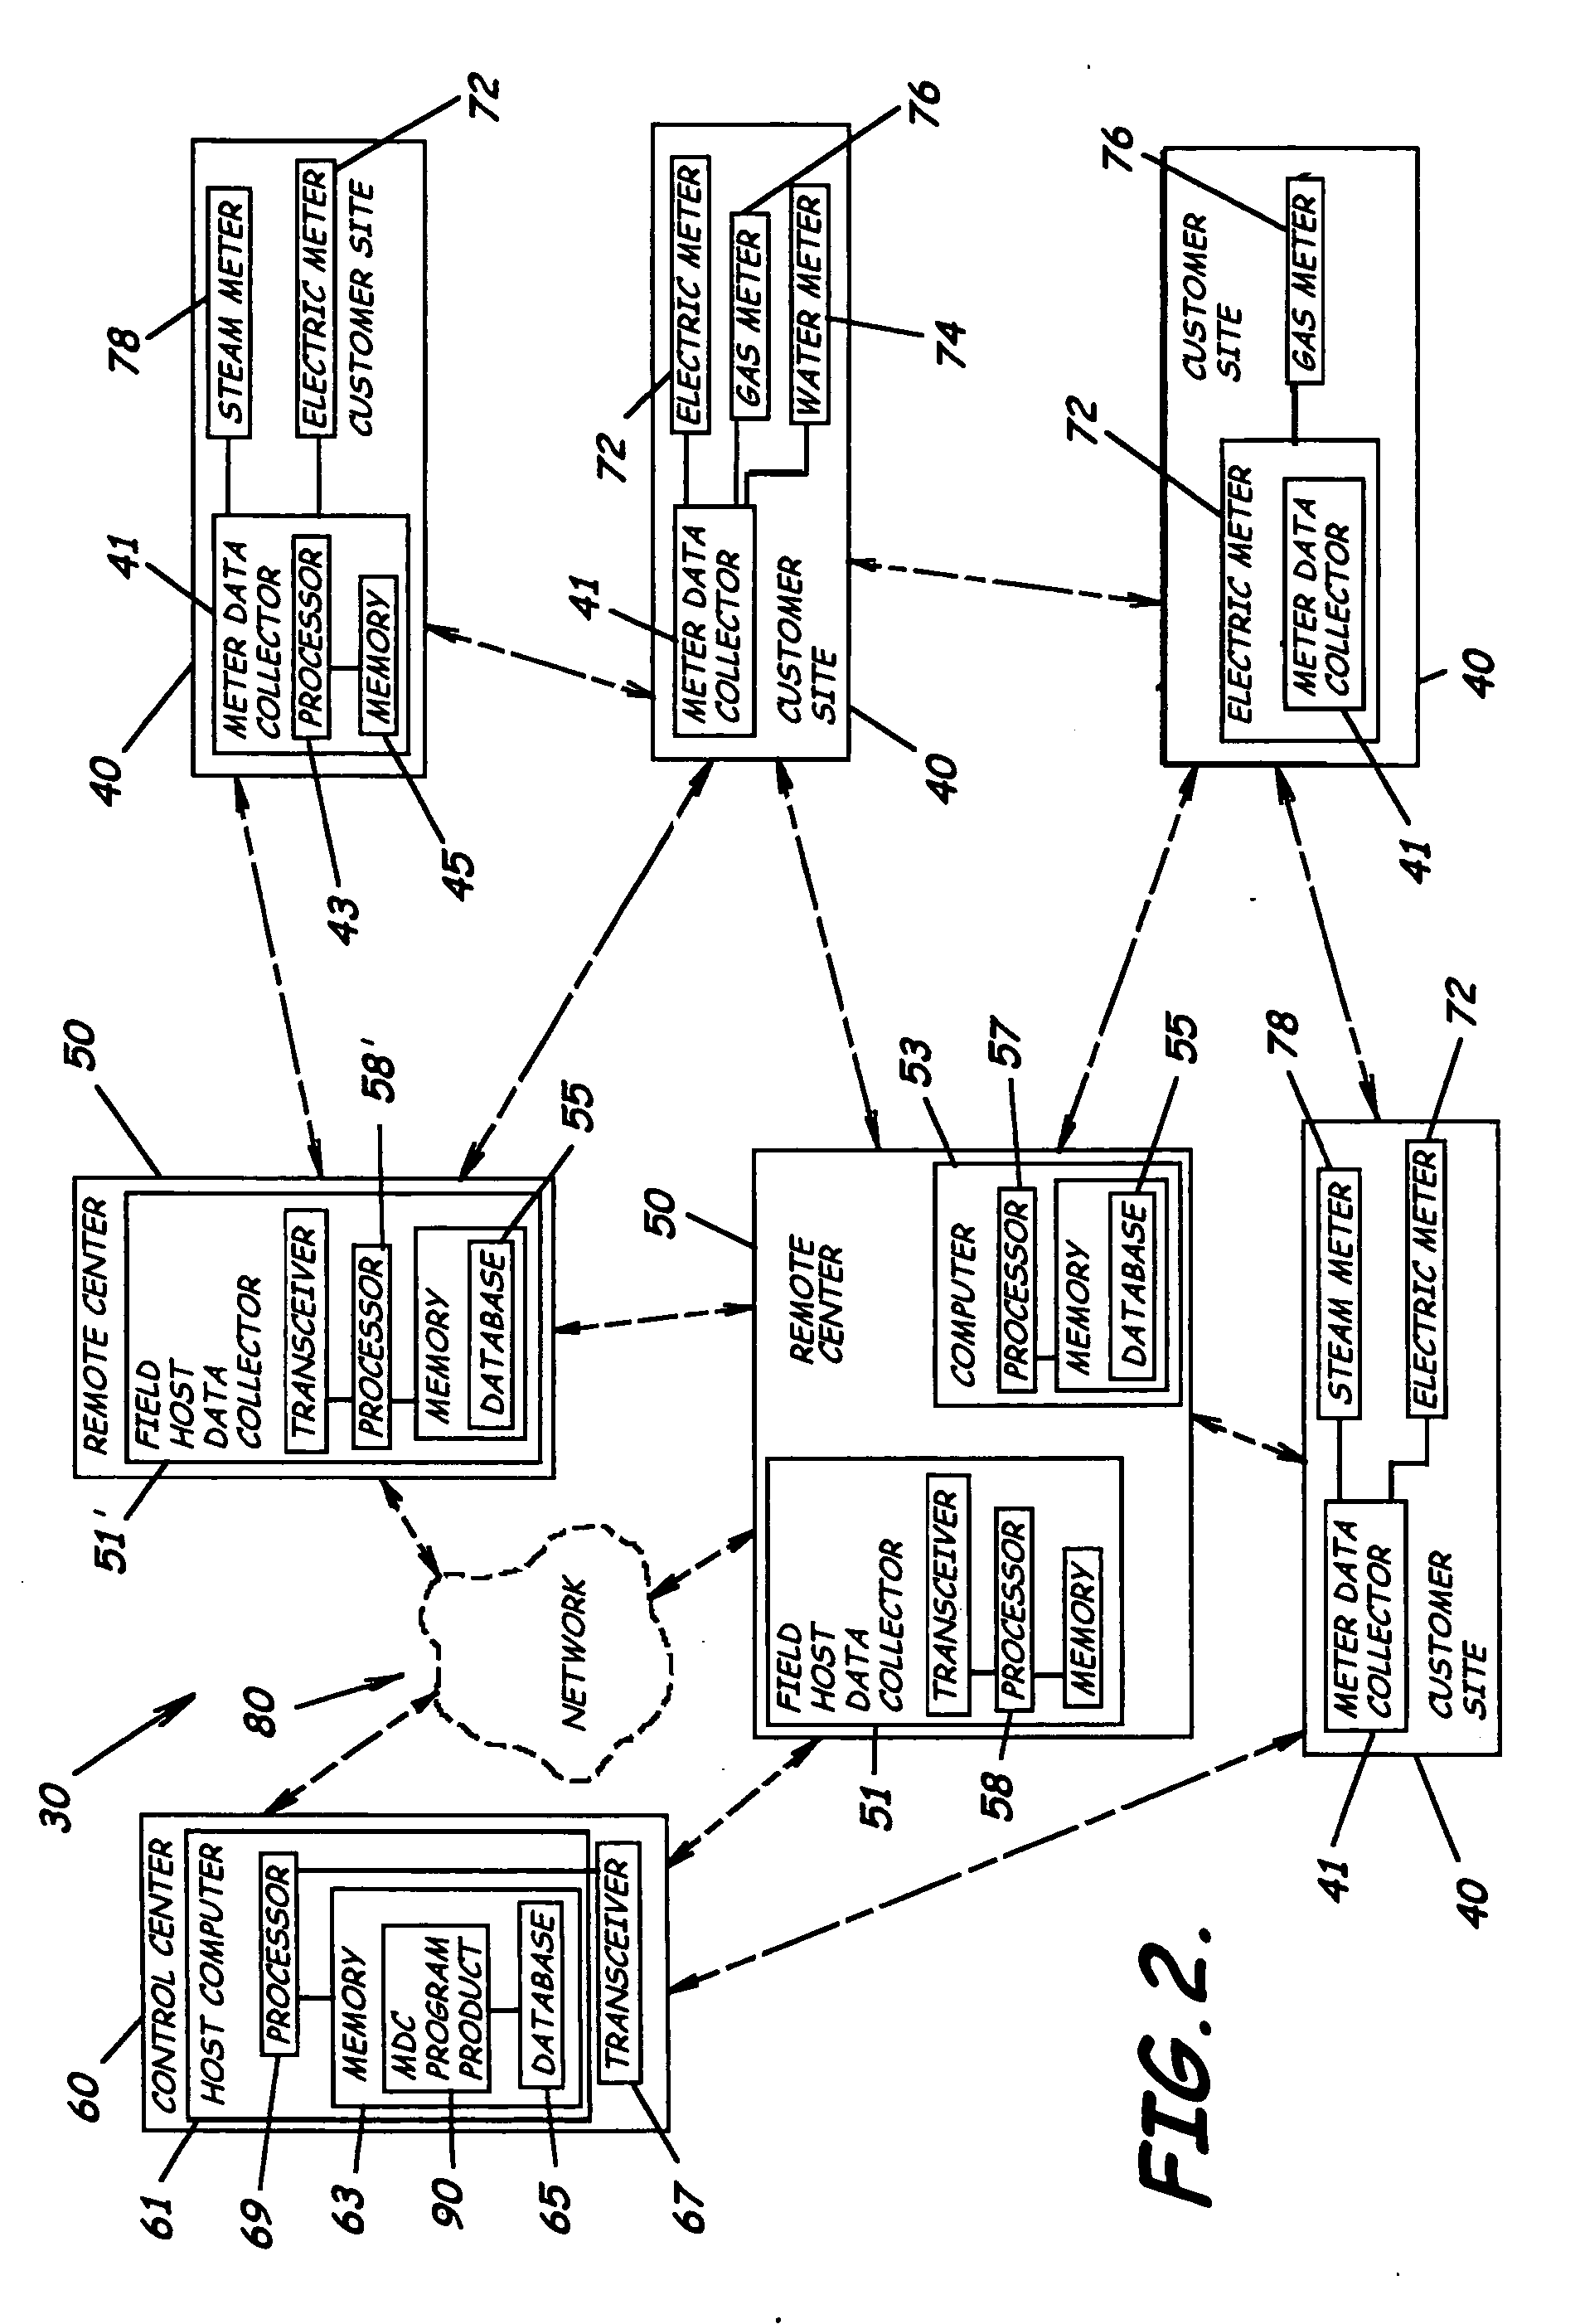 Automated meter reading system, communication and control network from automated meter reading, meter data collector, and associated methods